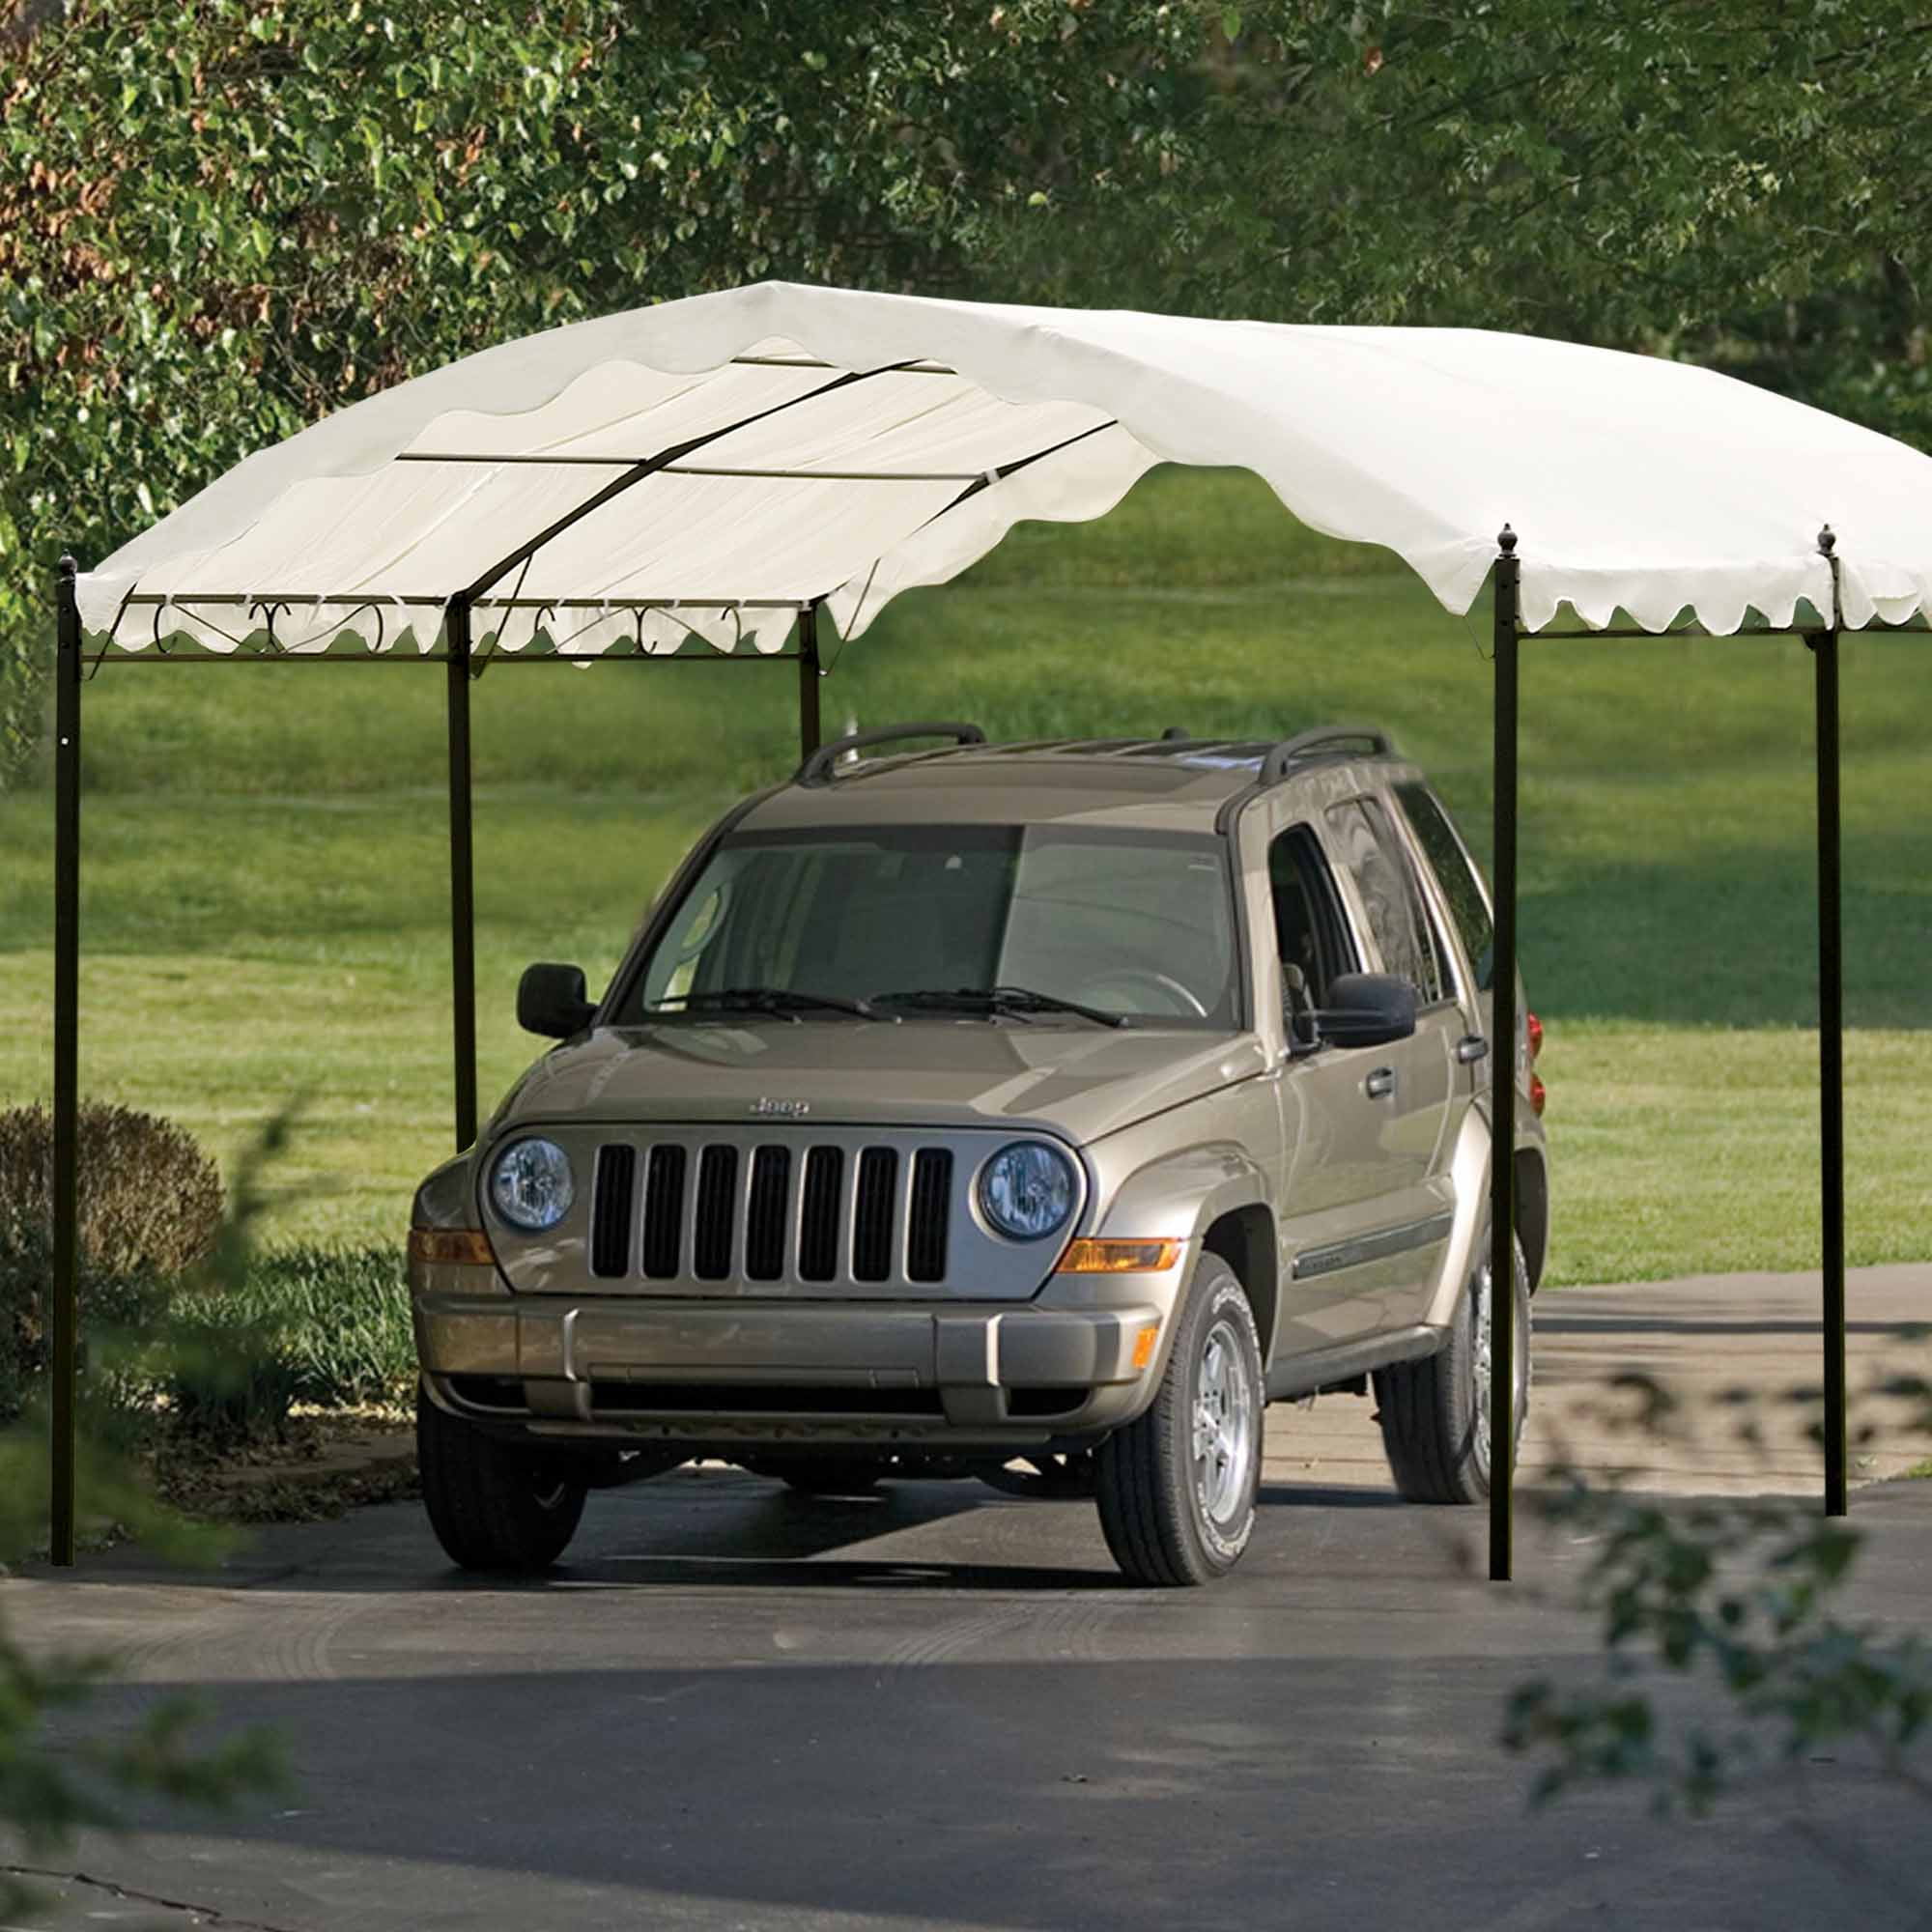 Car Shelter Car Cover Protector From All Elements Outdoor Portable Car  Garage